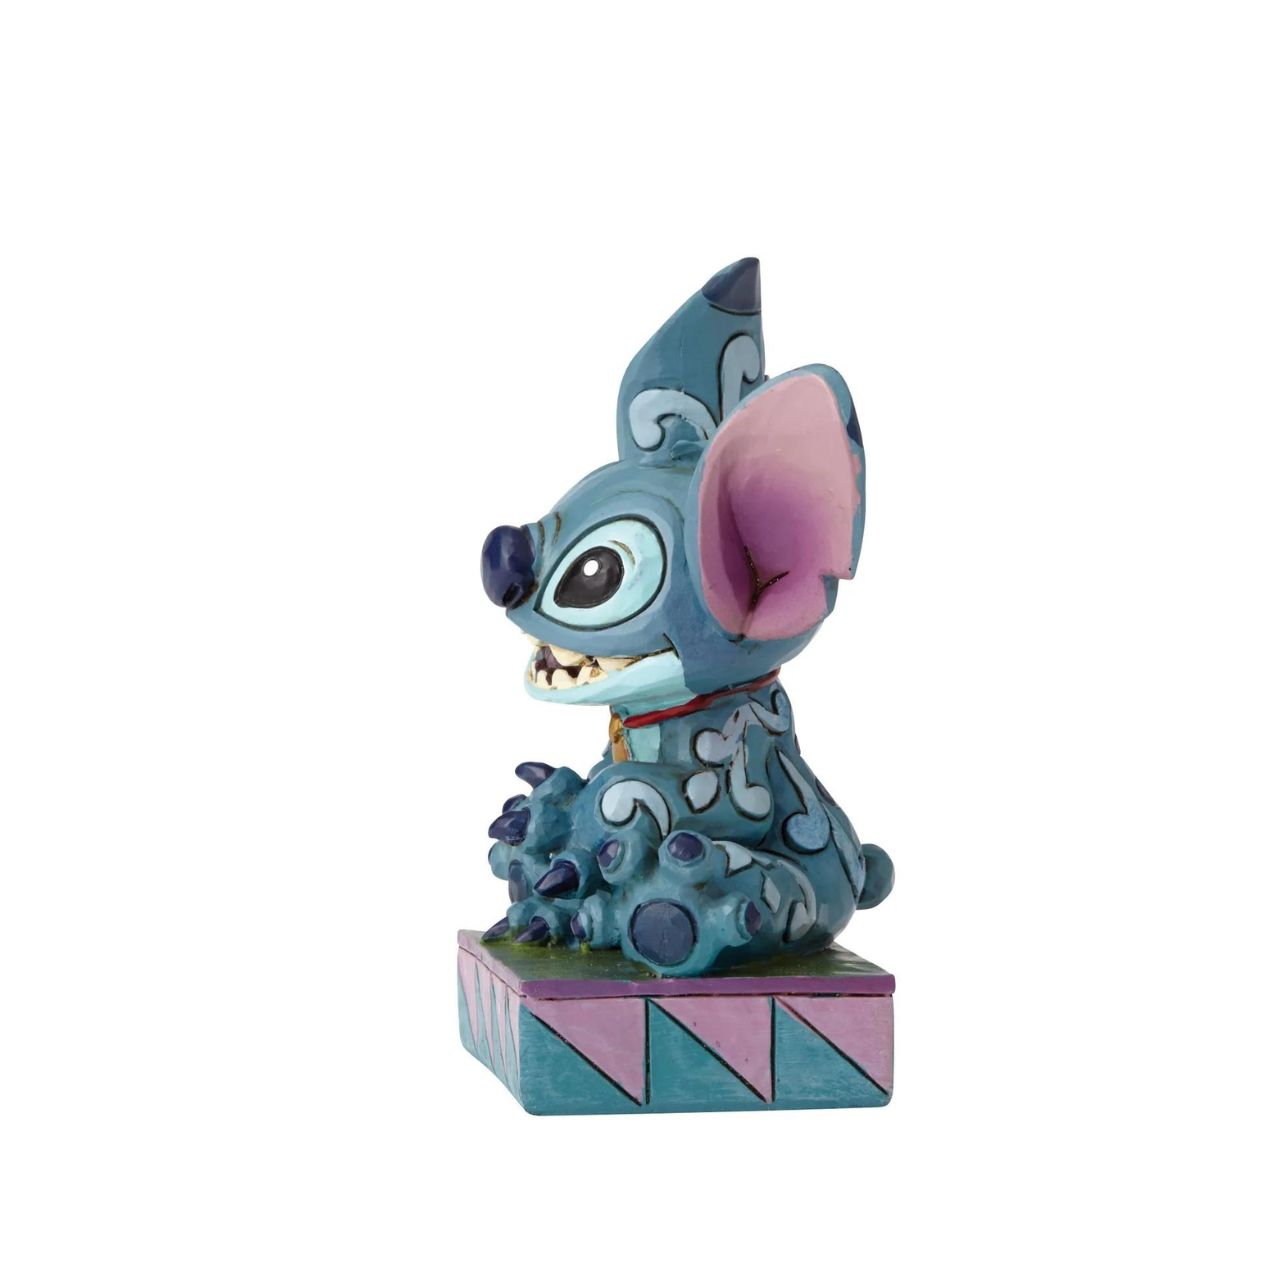 Disney Traditions Stitch Ohana Means Family  Designed by award winning artist and sculptor, Jim Shore for the Disney Traditions brand, this Stitch figurine is a part of a personality poses collection. He is featured displaying his typical mischievous smile.